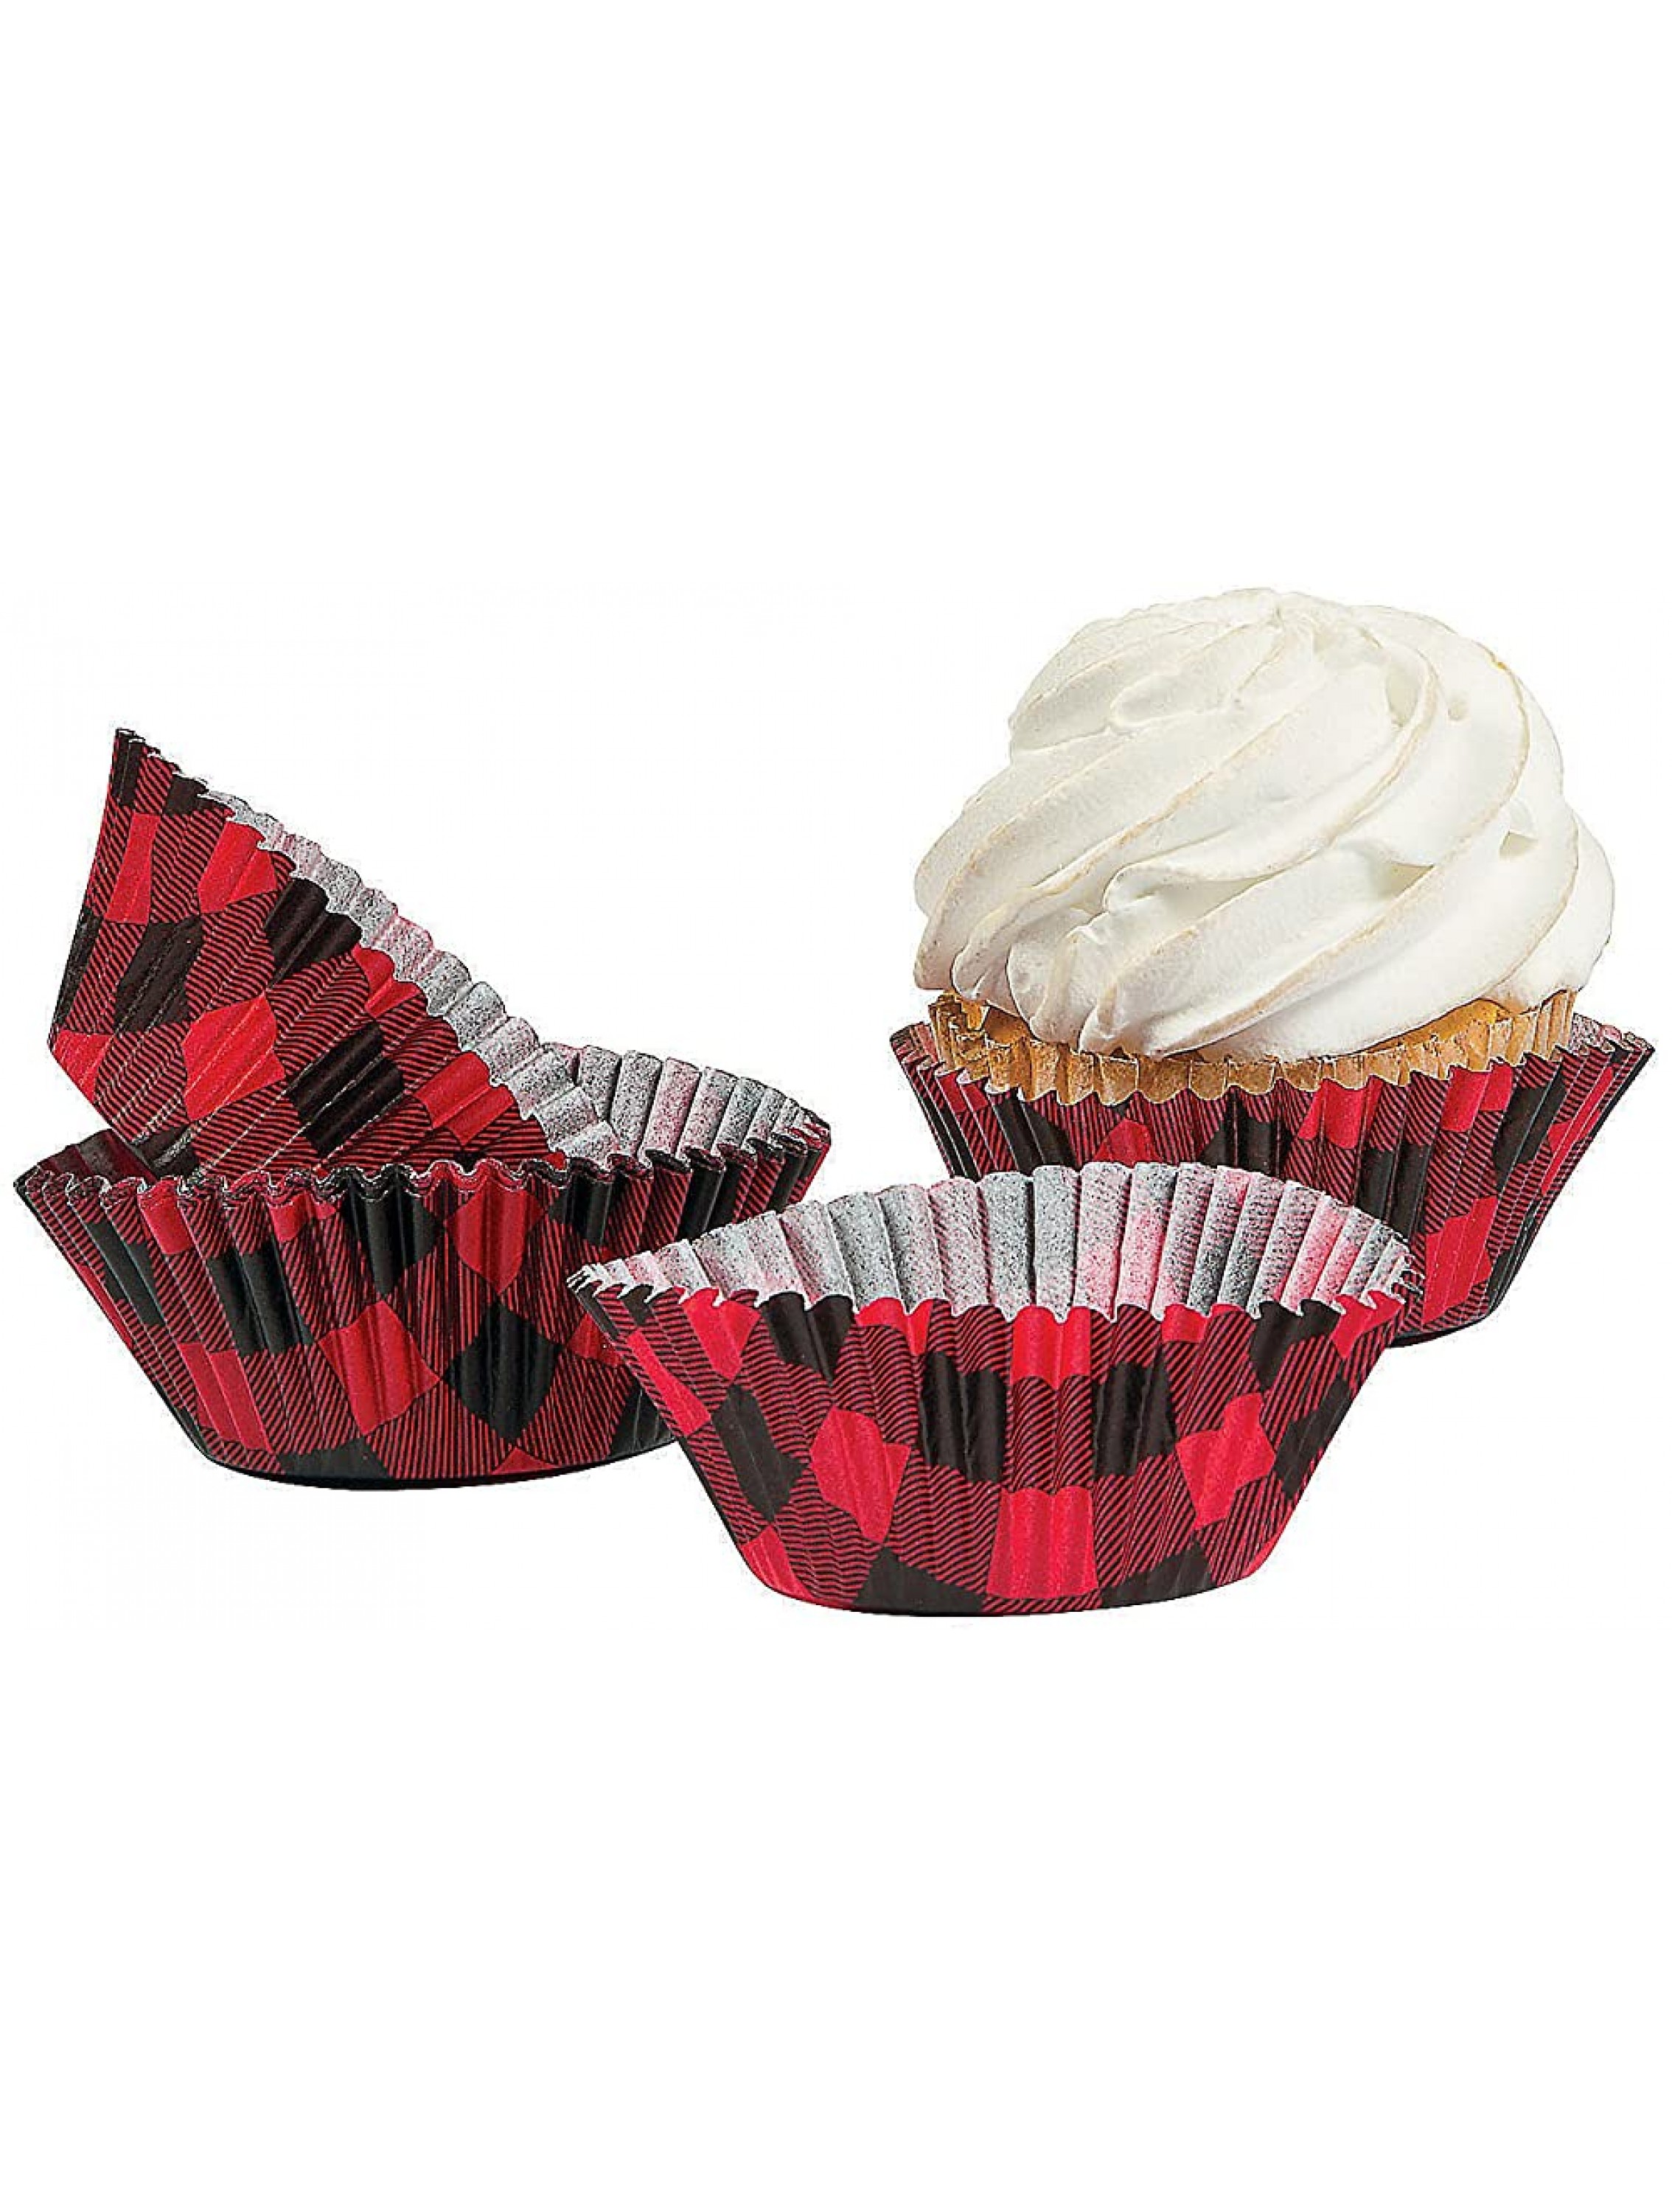 Buffalo Plaid Cupcake Wrappers Bulk 100 Pack Christmas Baking Cups and Lumberjack Party Supplies - B8YMHV8IJ